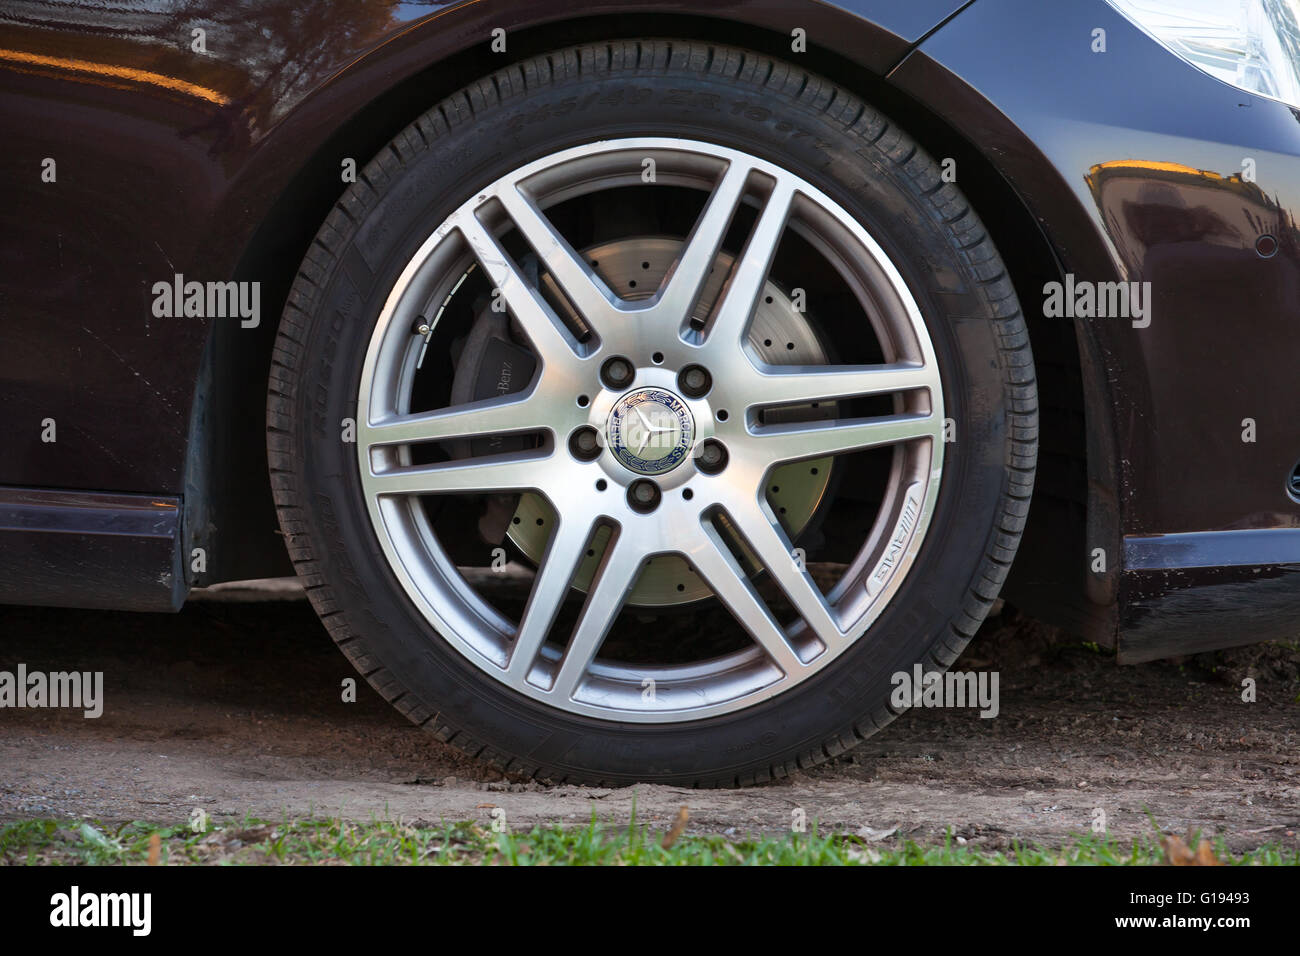 Imatra, Finland - May 8, 2016: Closeup photo of car wheel designed by AMG with Mercedes Benz logotype Stock Photo